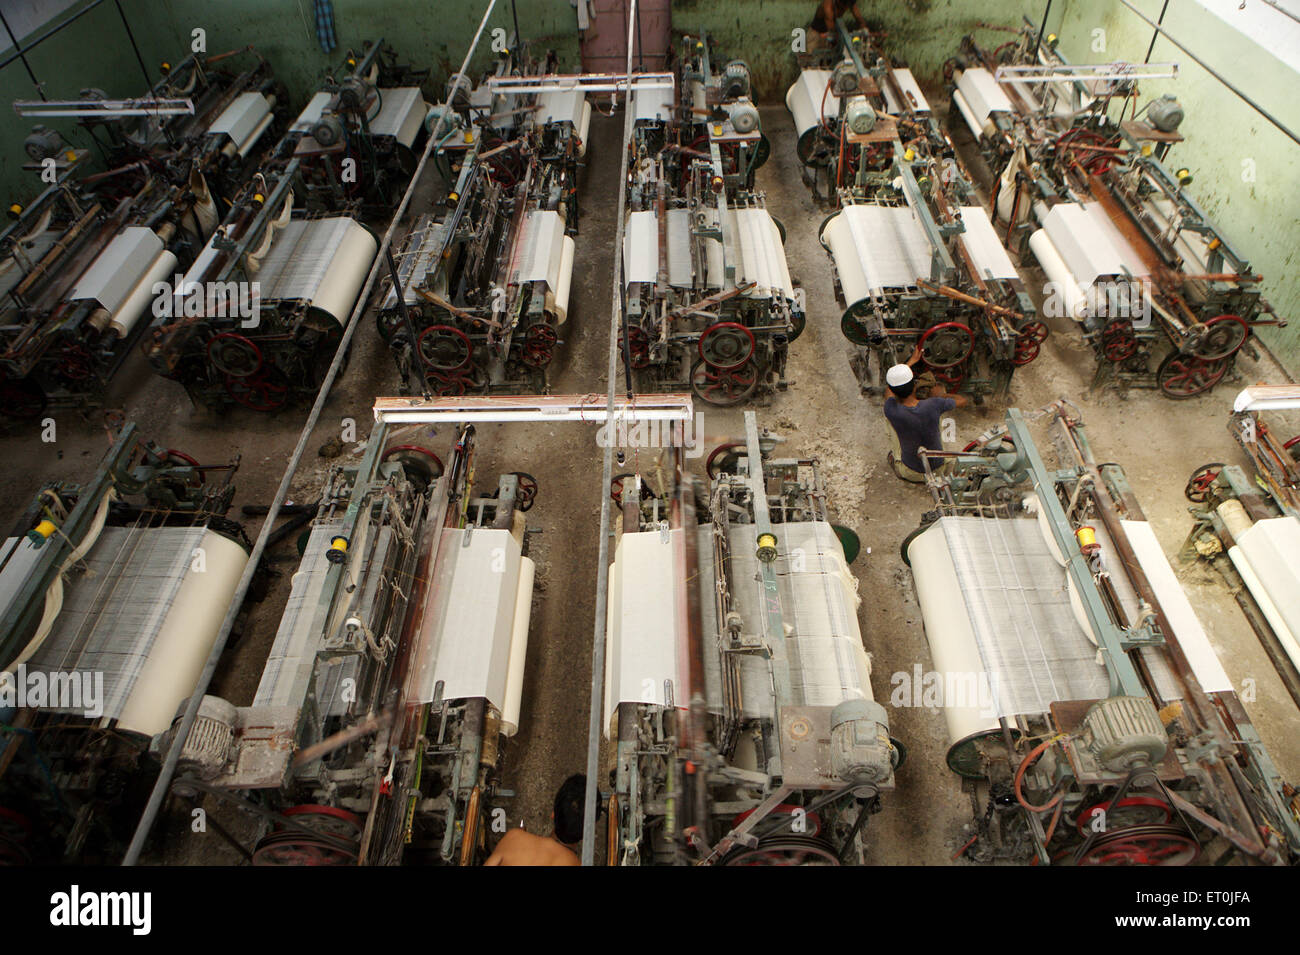 A Indian Cotton Mills Factory S Simplex Machine. Editorial Stock Photo -  Image of indian, west: 172269233